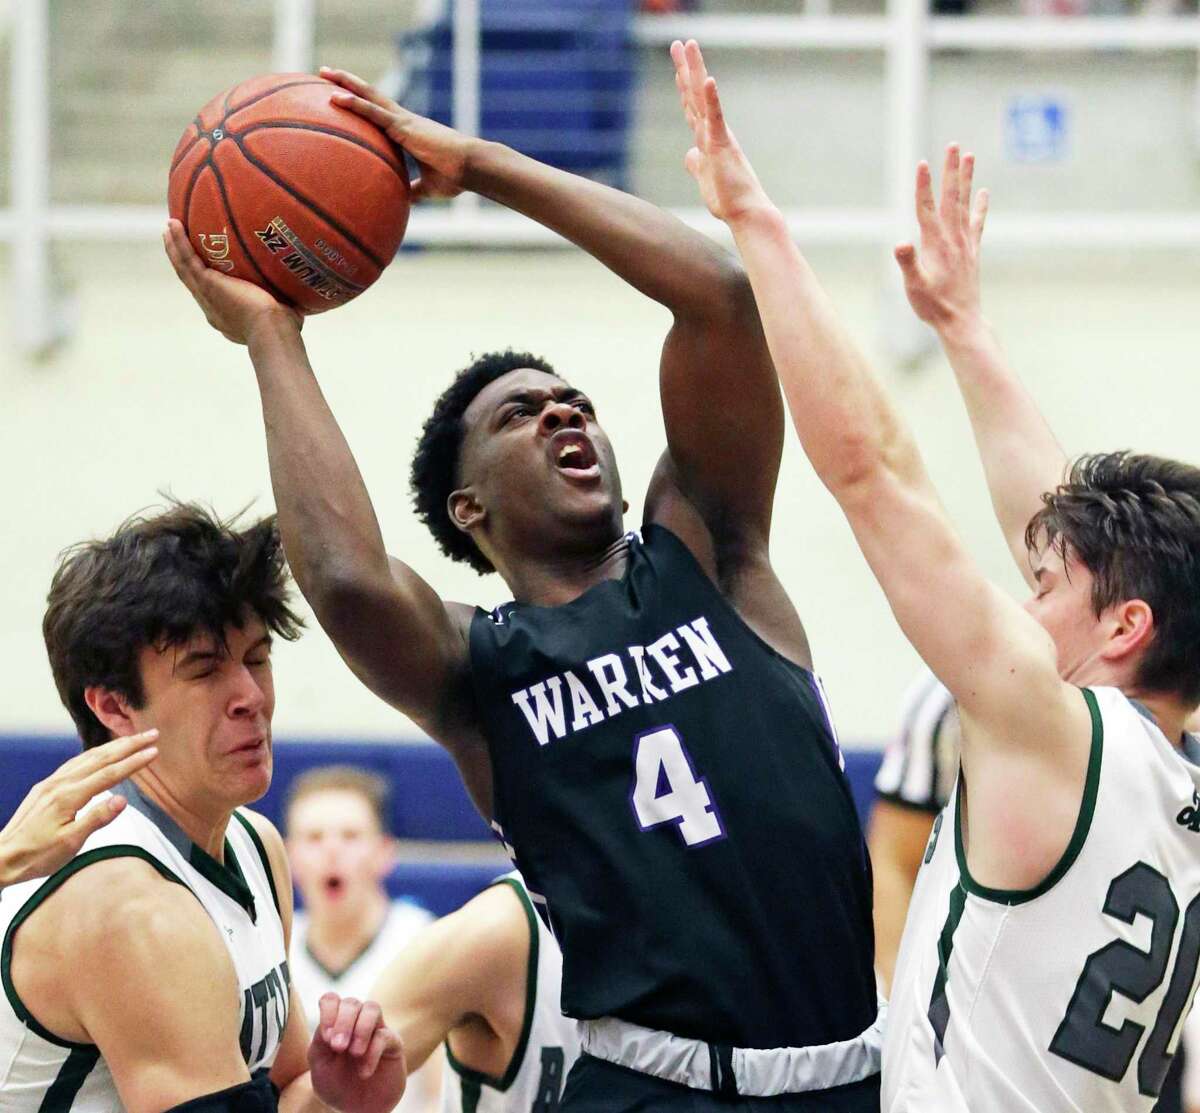 Zane Elmore battles in the lane to put up a shot against Will Carsten, left, and Zach Lee as Warren plays Reagan in boys basketball playoff action at Taylor Field House on Feb. 24, 2020.